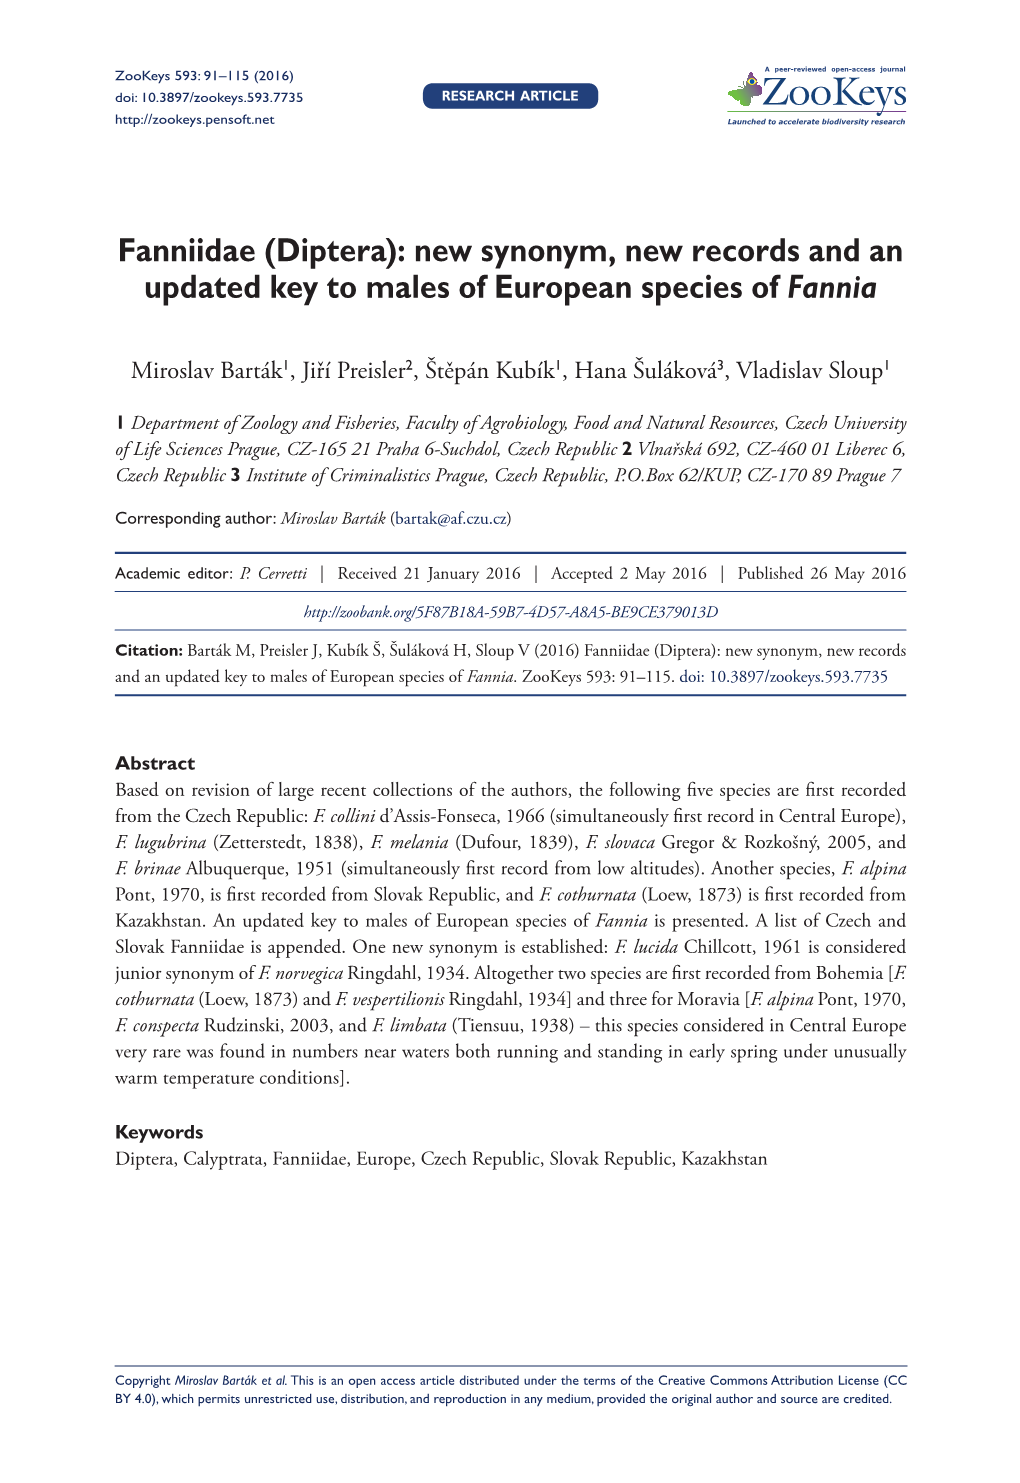 Fanniidae (Diptera): New Synonym, New Records and an Updated Key to Males of European Species of Fannia